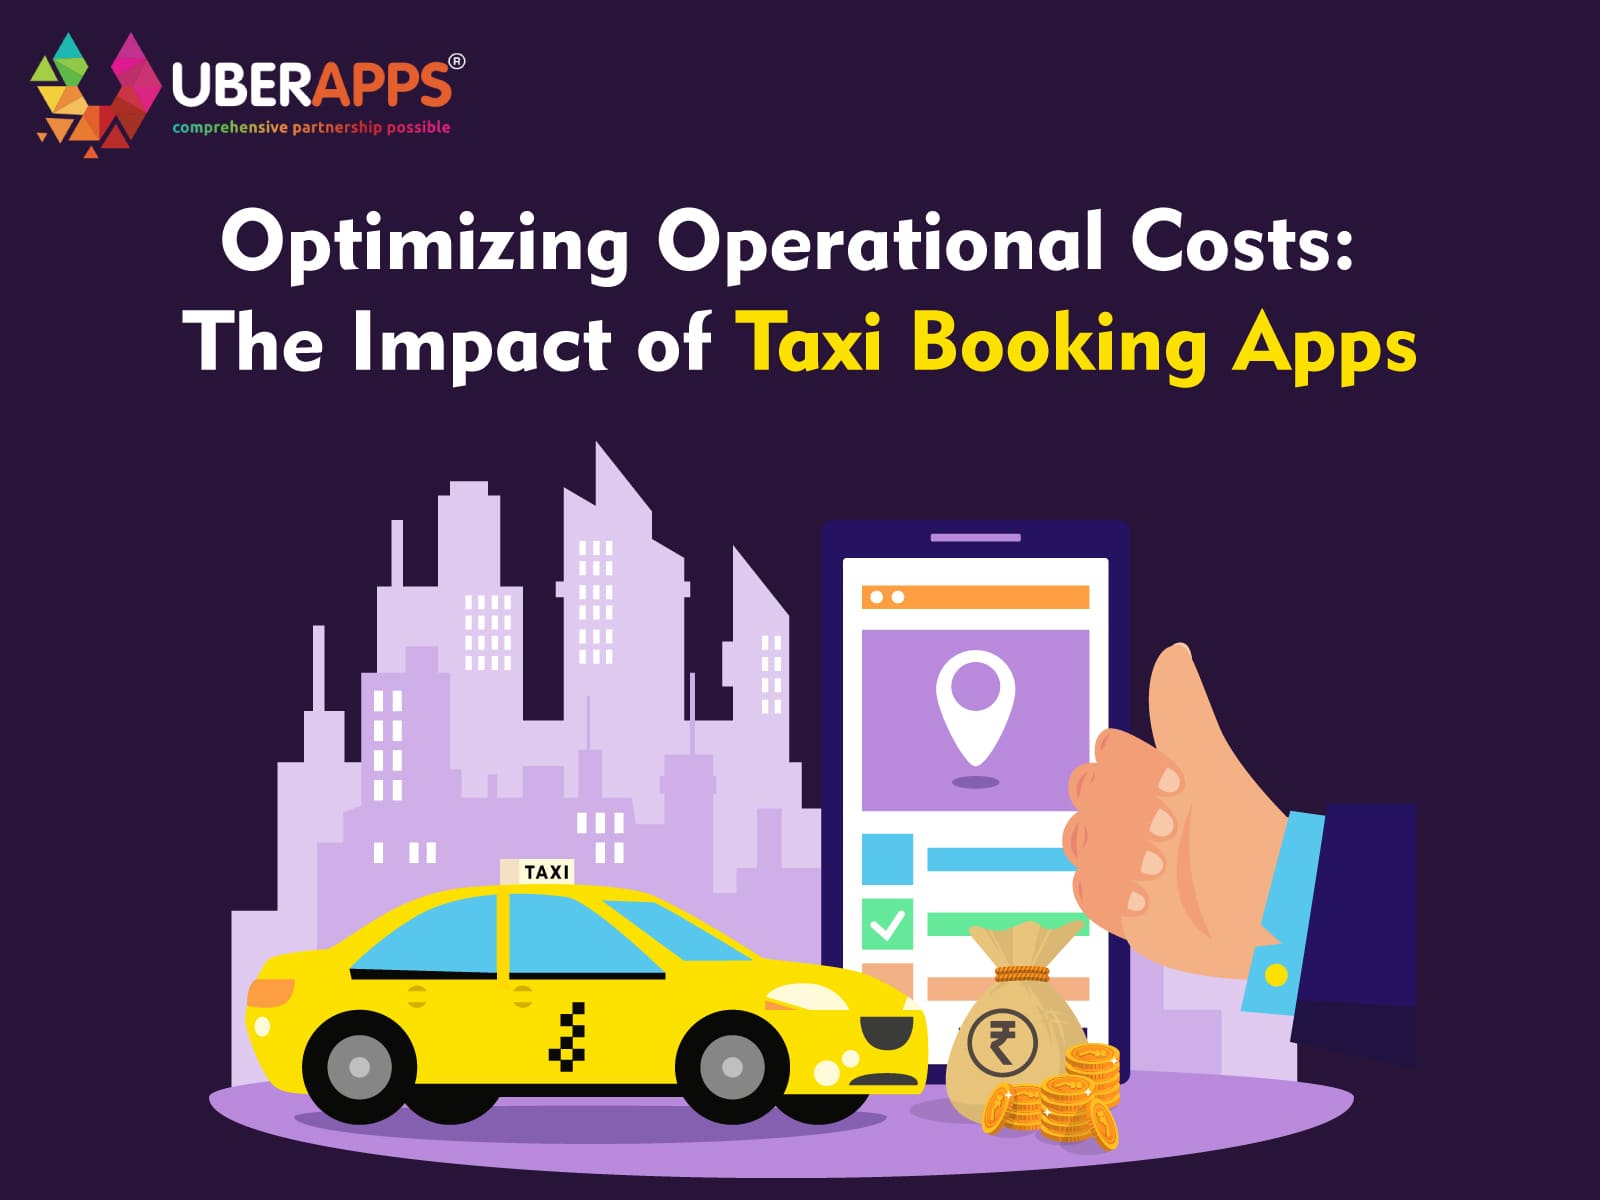 Optimizing Operational Costs: The Impact of Taxi Booking Apps